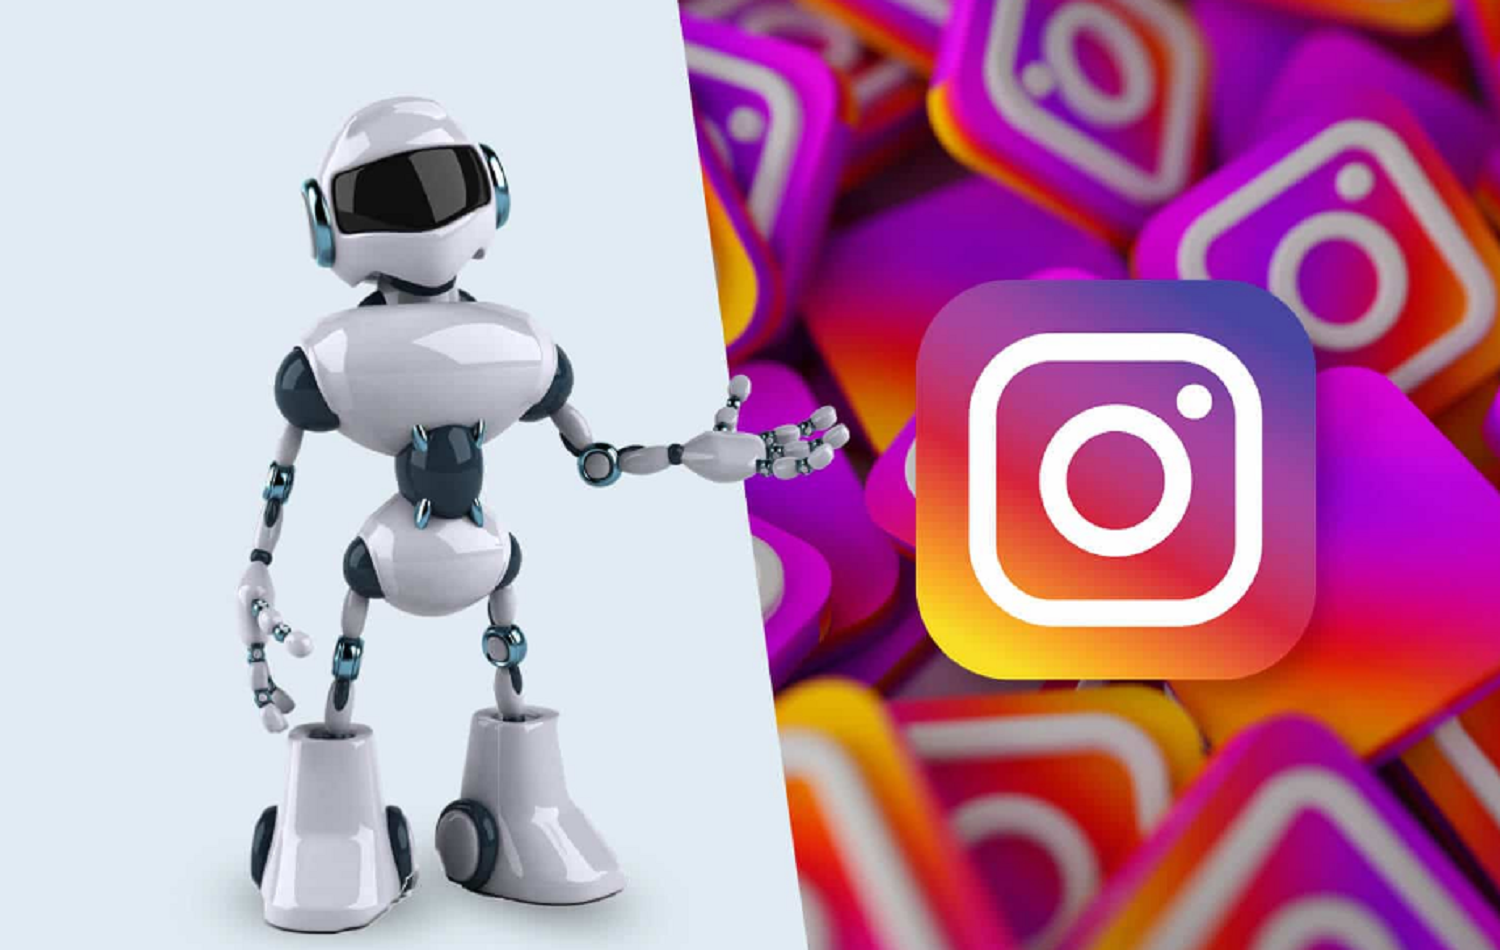 insta and bots